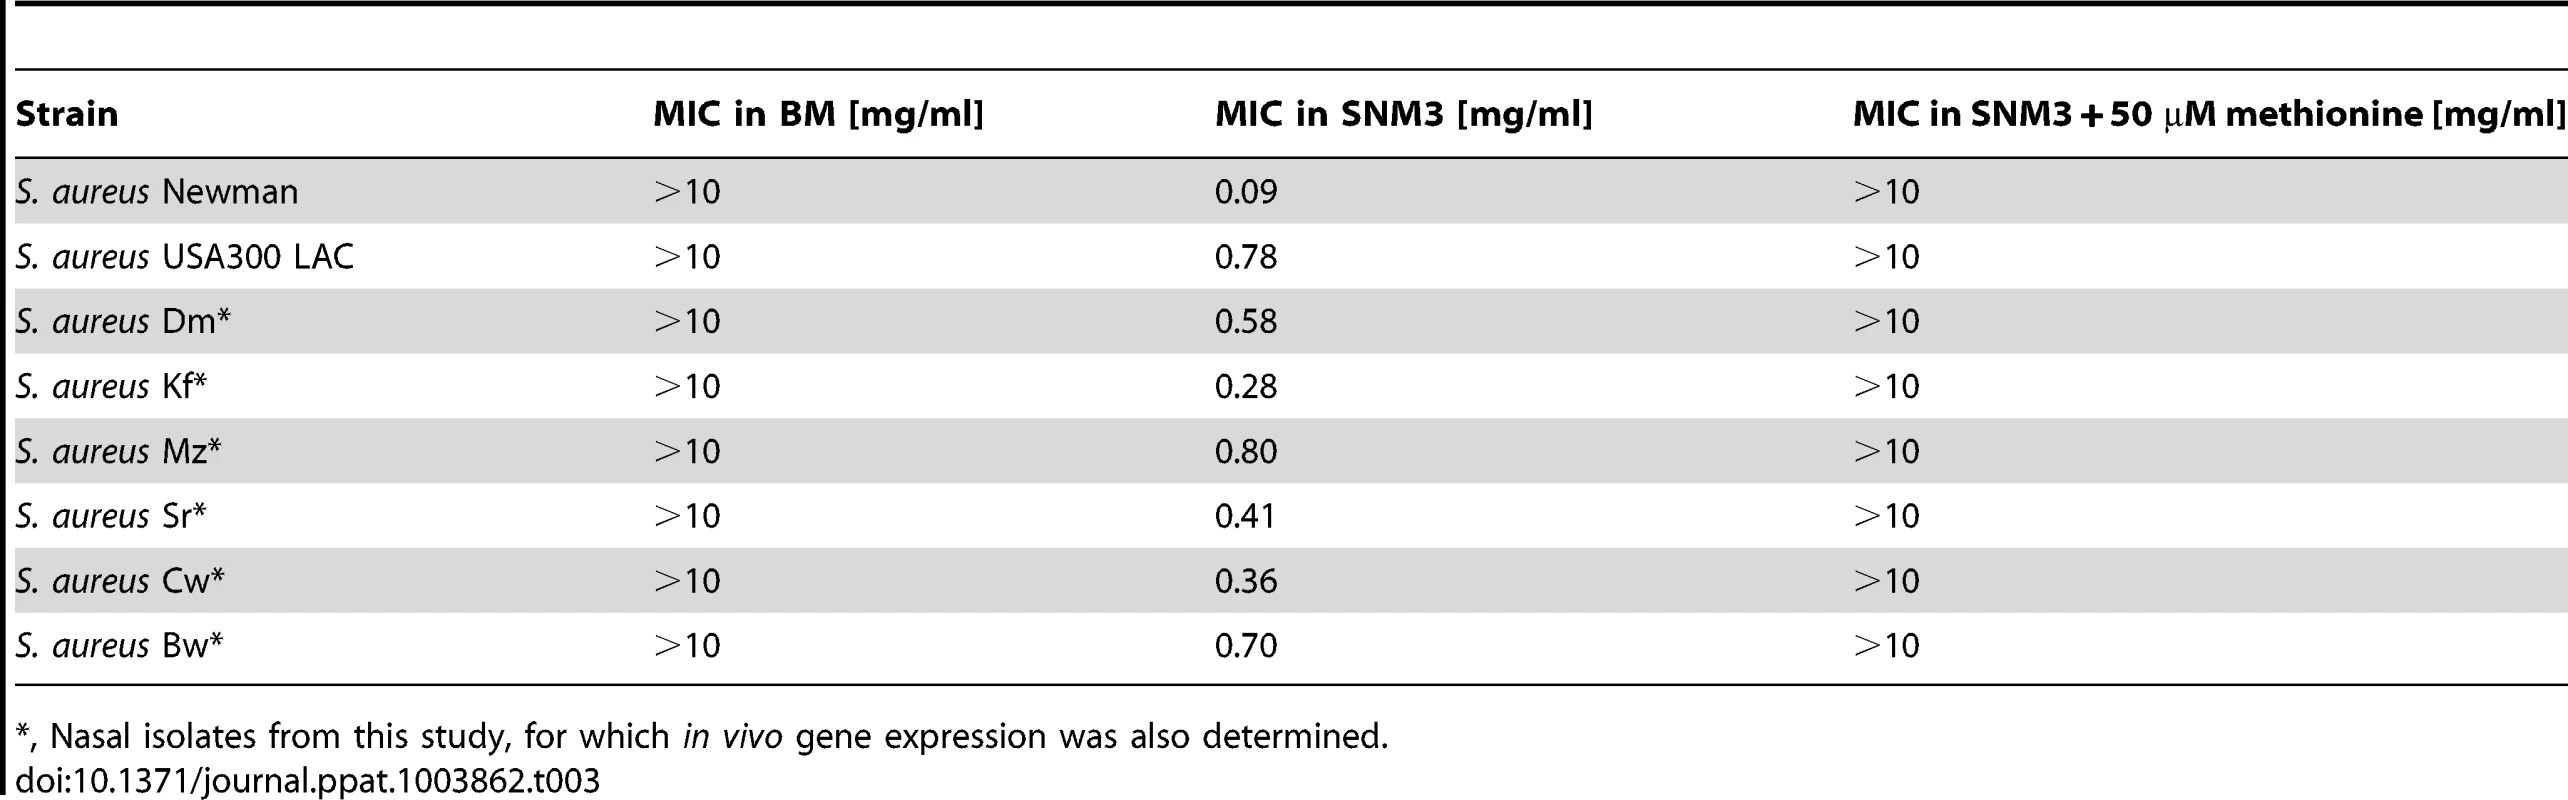 MIC values of DL-propargylglycine for <i>S. aureus</i> strains in complex medium (BM) and SNM3.